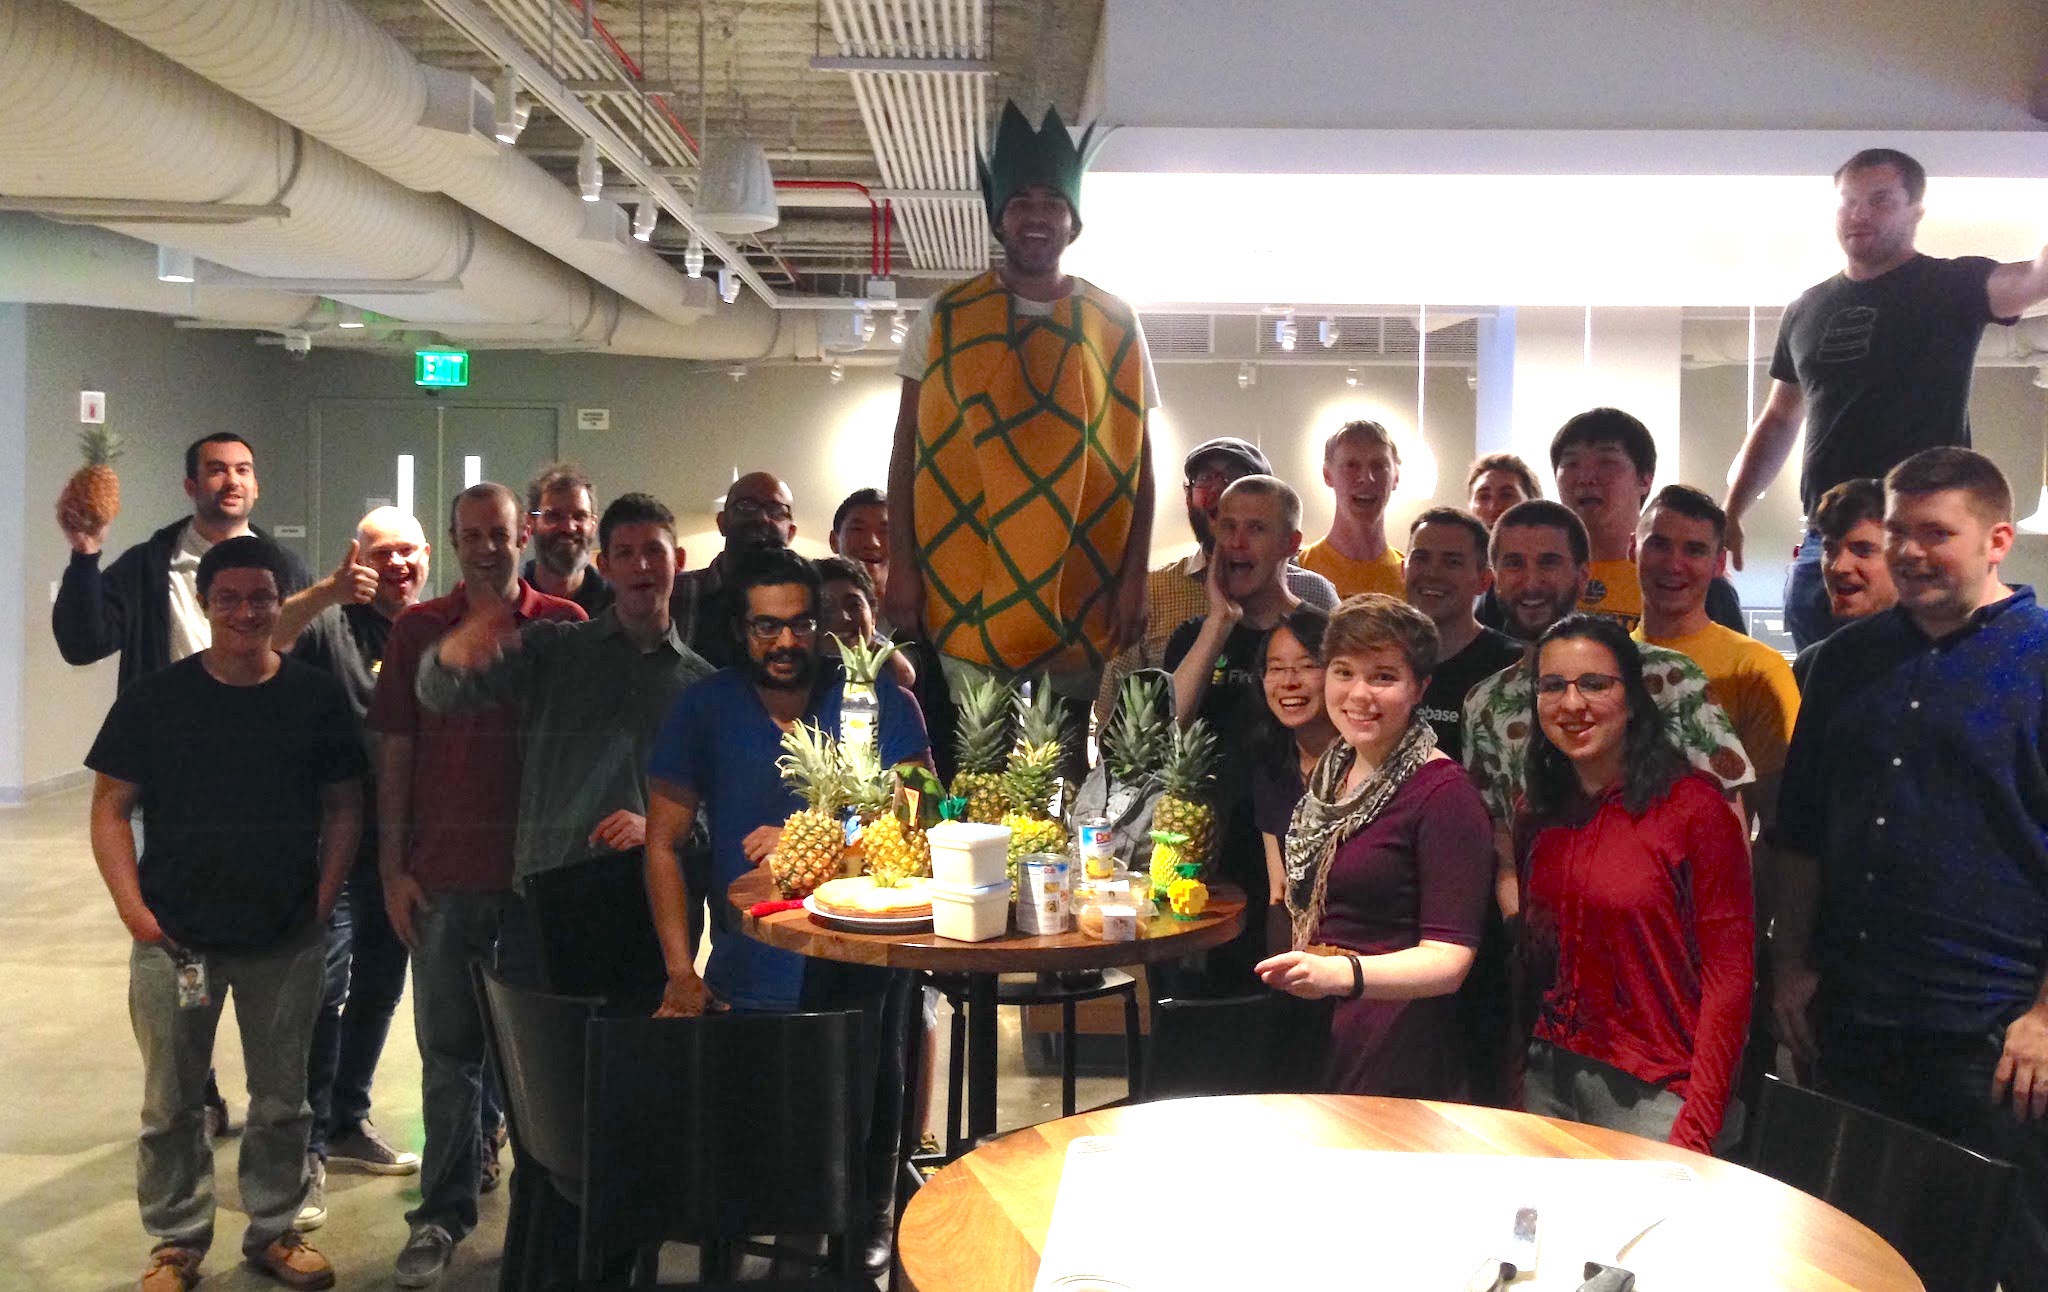 Arjun clearly wins with his full-body pineapple suit.